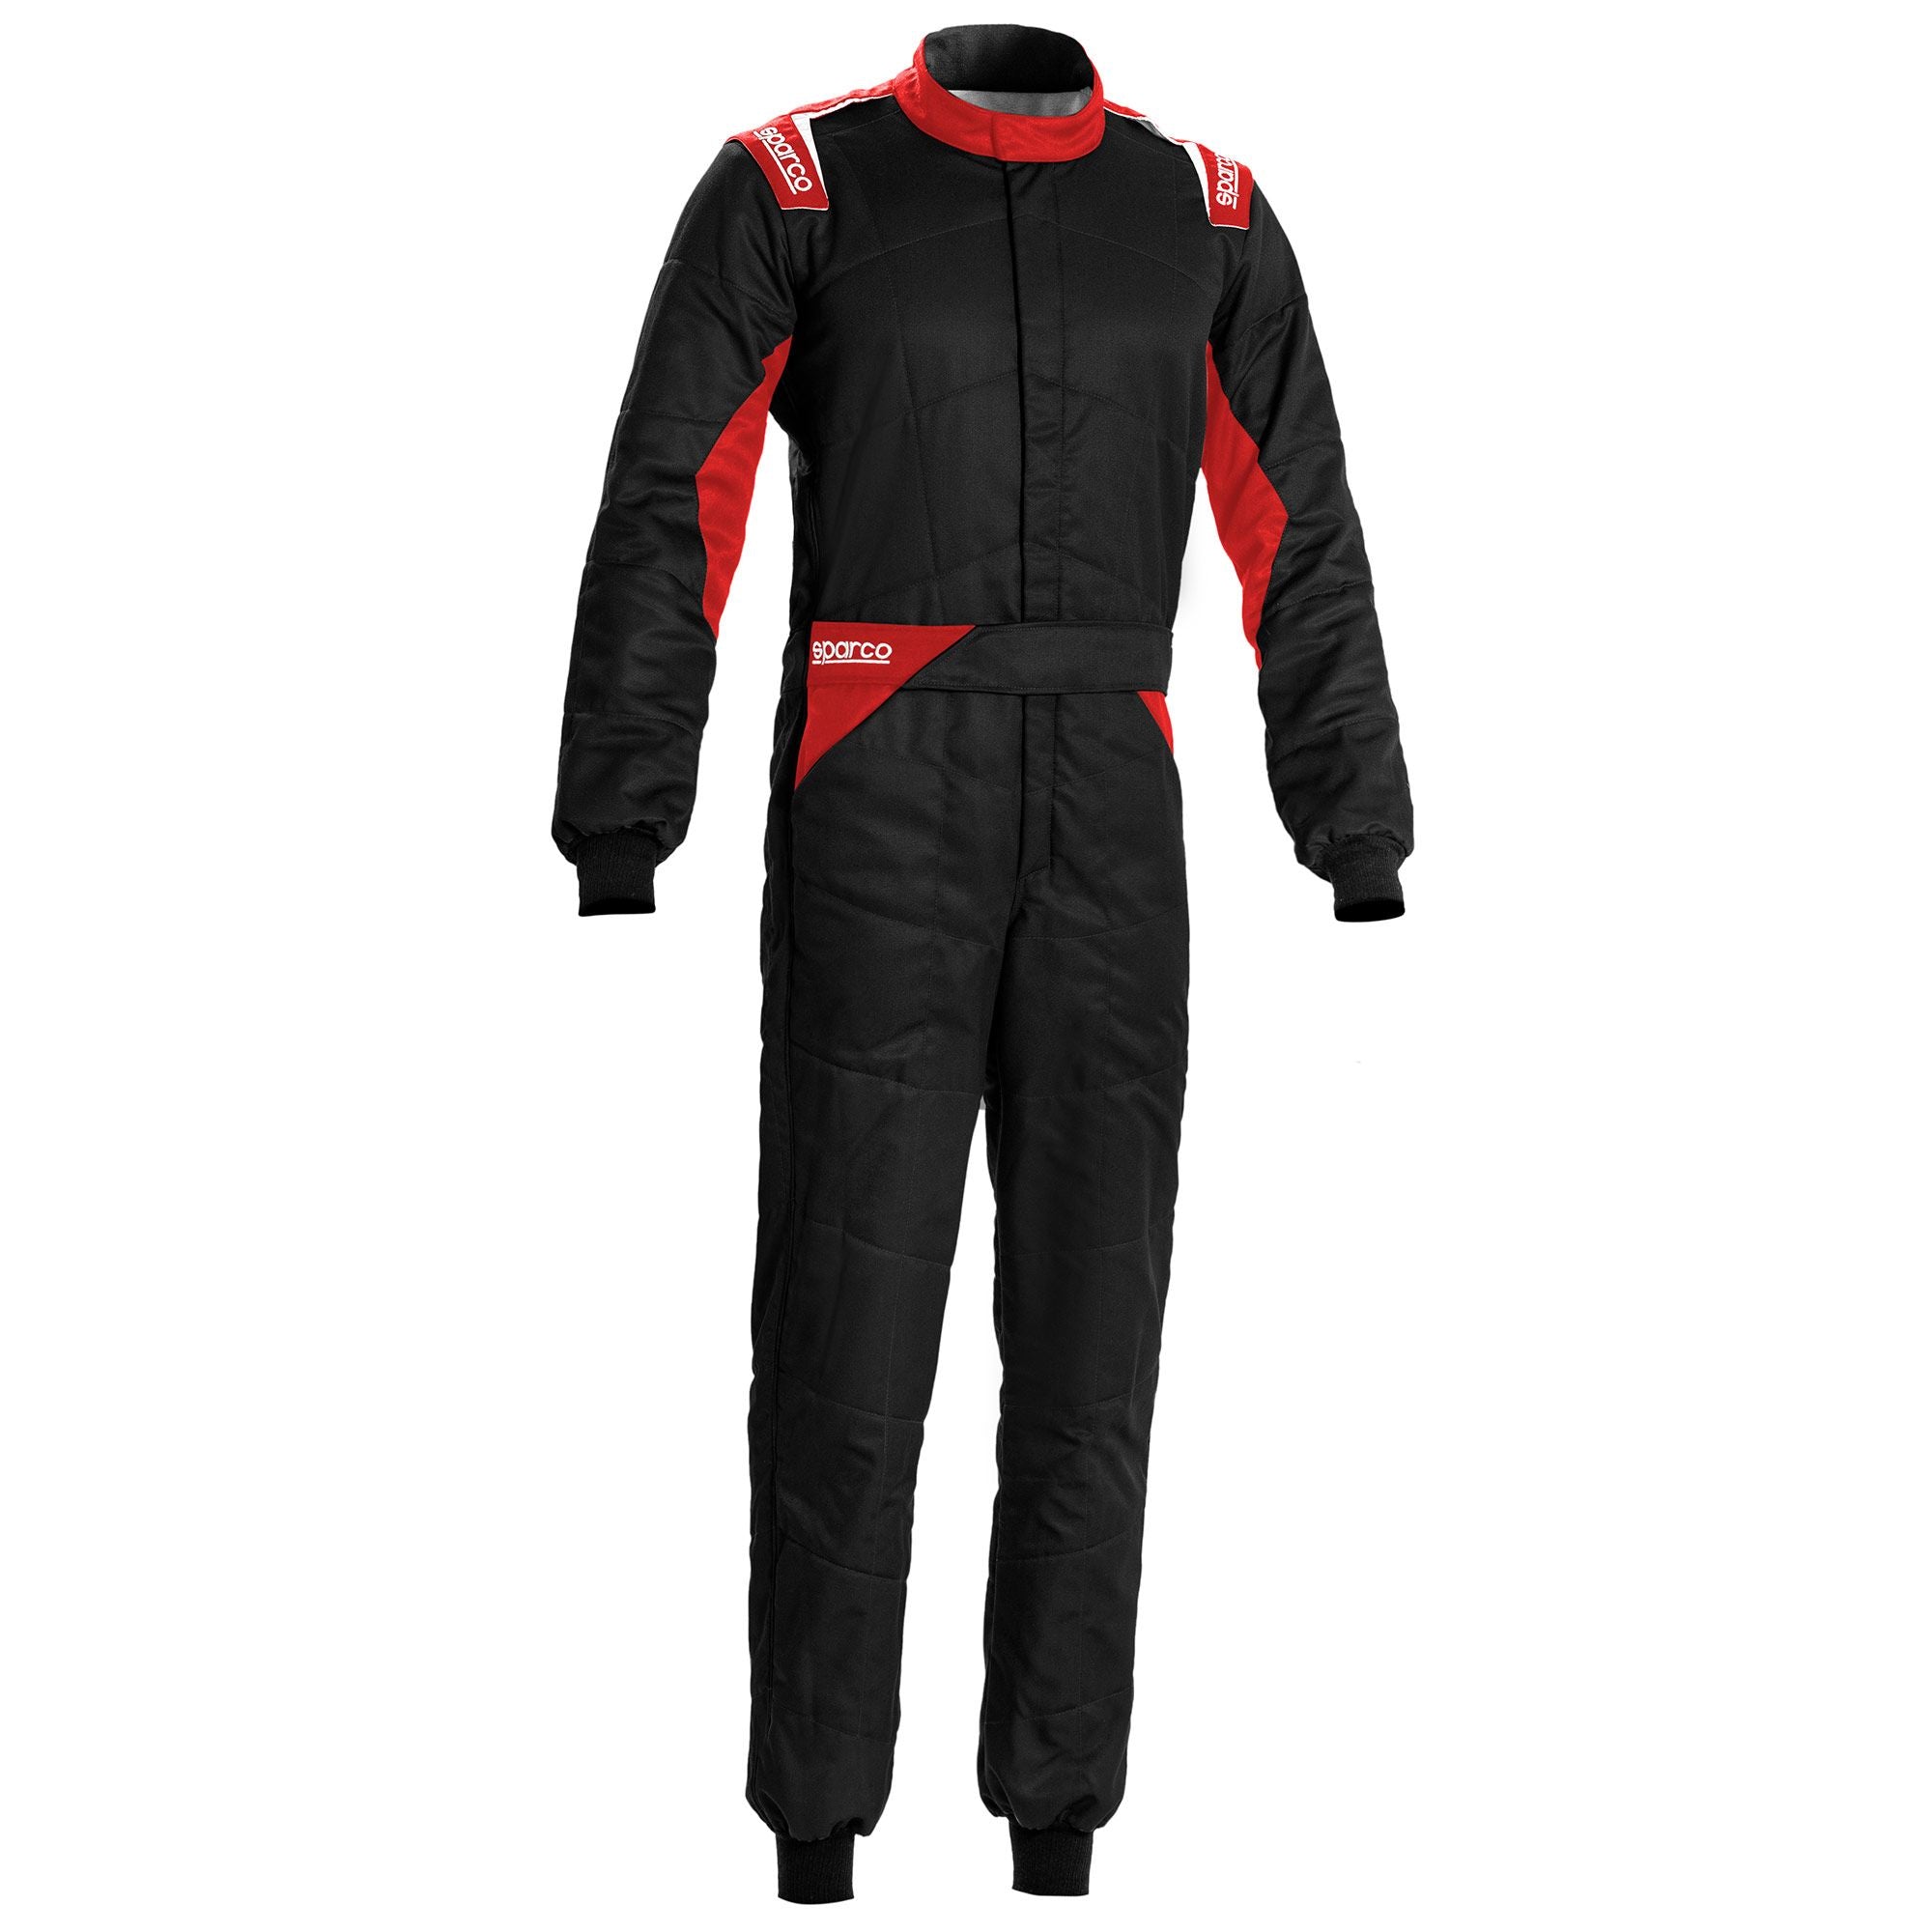 SPARCO 00109350NRRS SPRINT 2022 Racing suit, FIA 8856-2018, black/red, size 50 Photo-0 